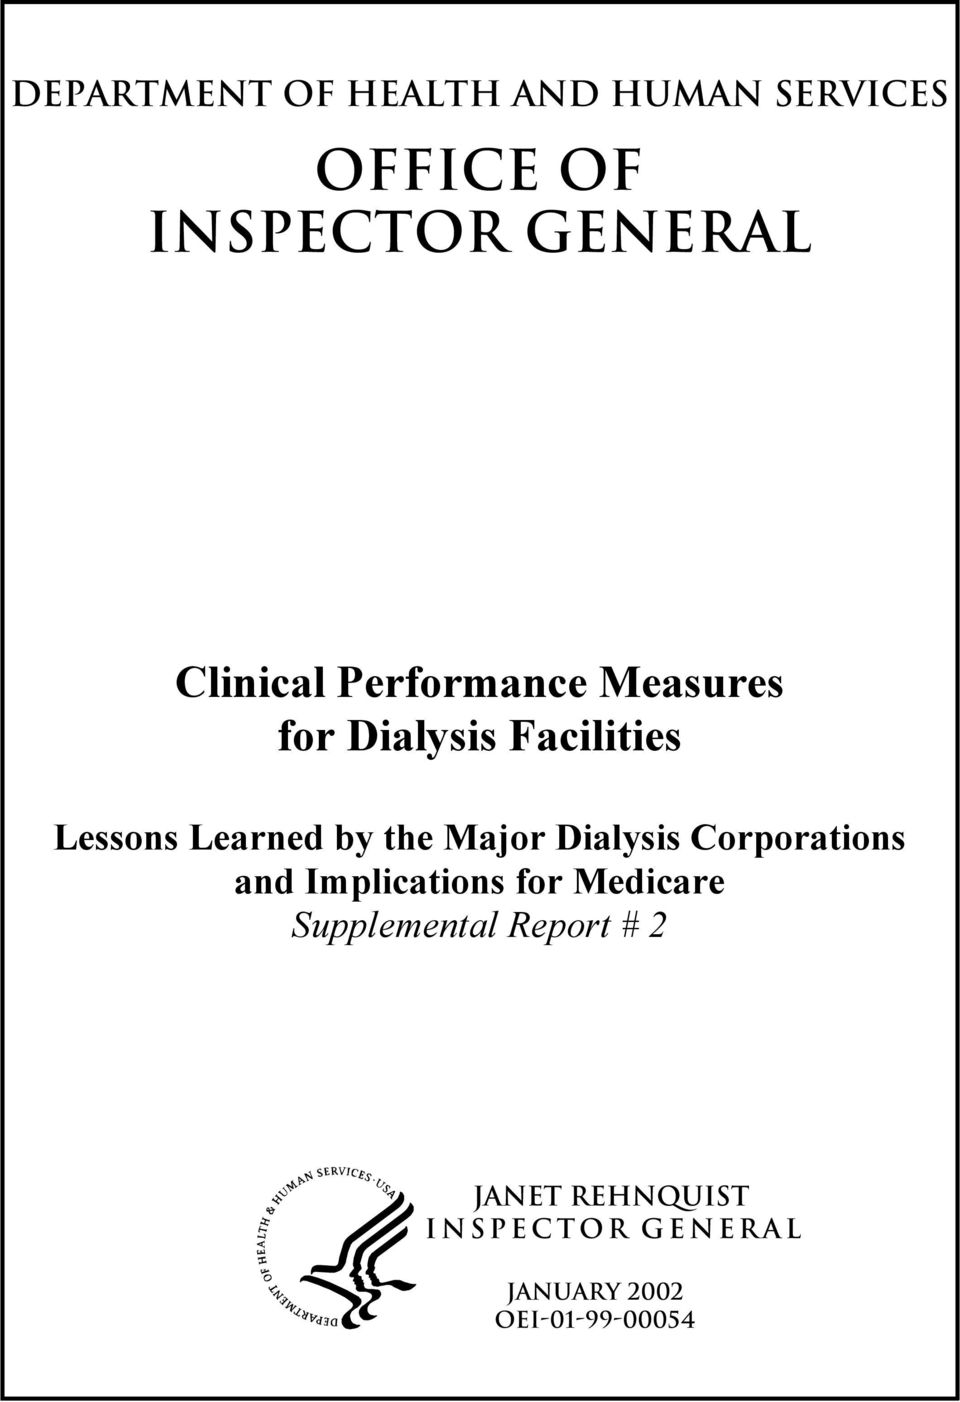 the Major Dialysis Corporations and Implications for Medicare